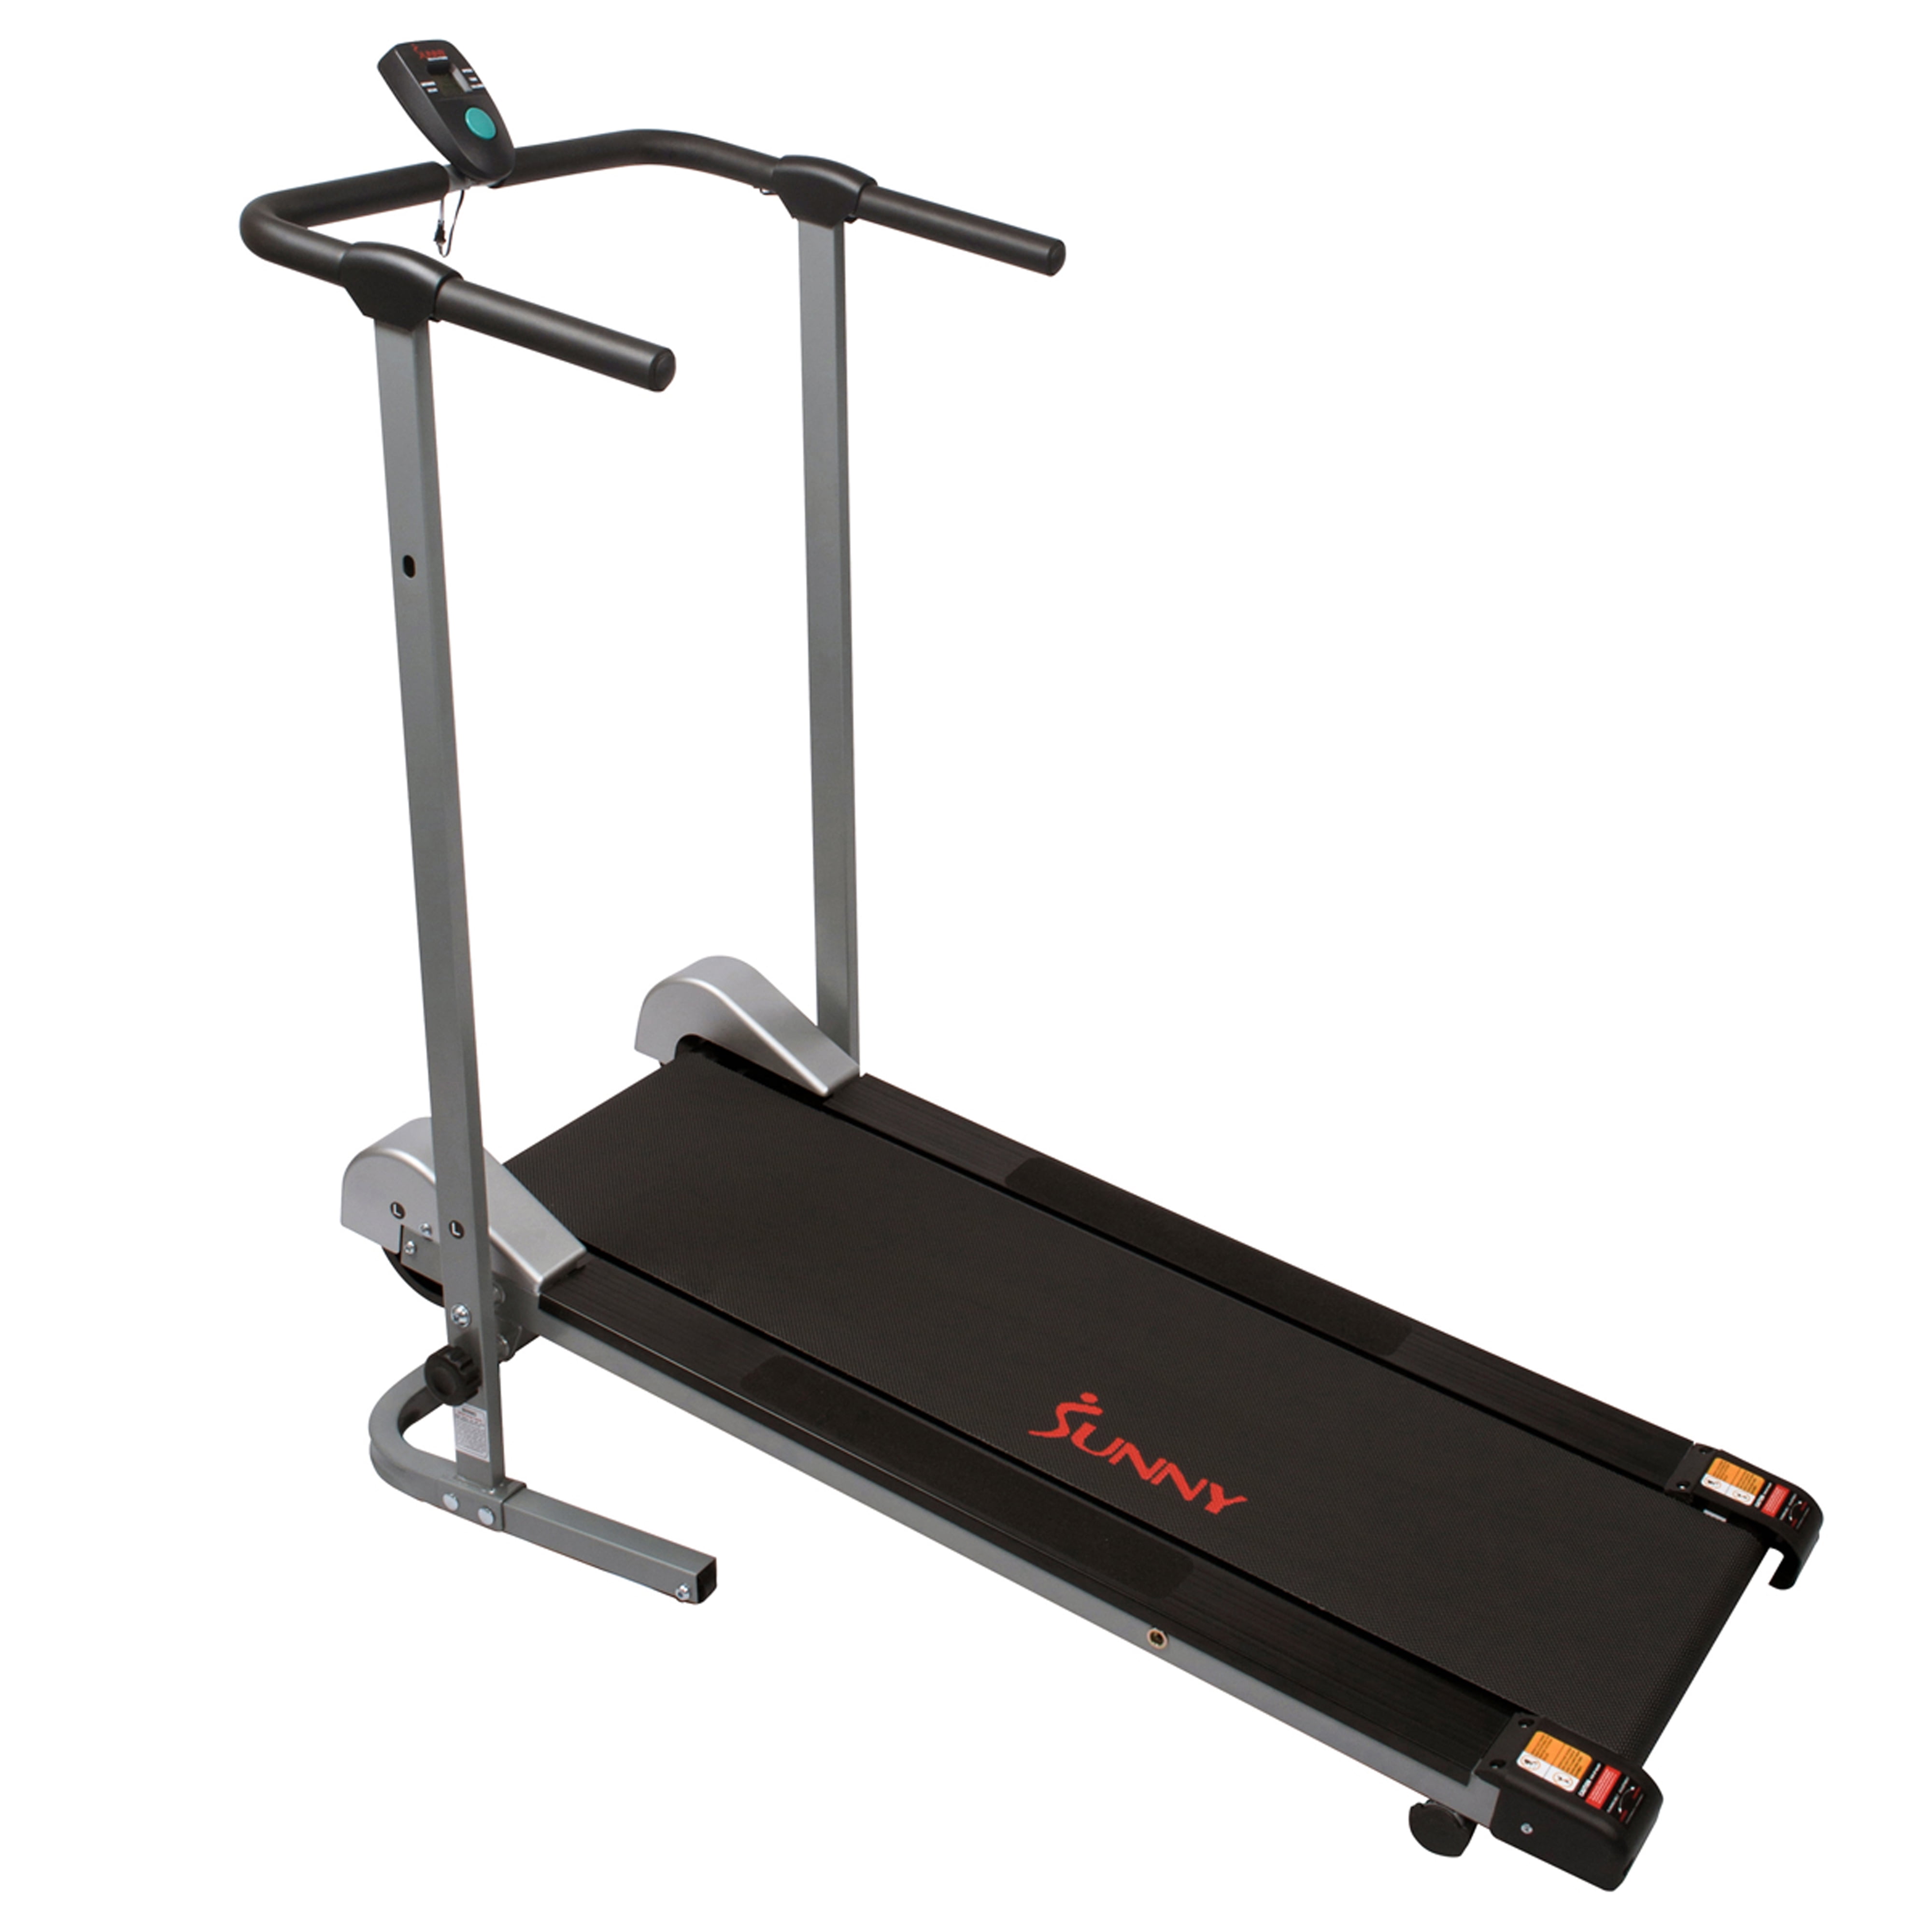 The 5 Best Manual Treadmills for Home